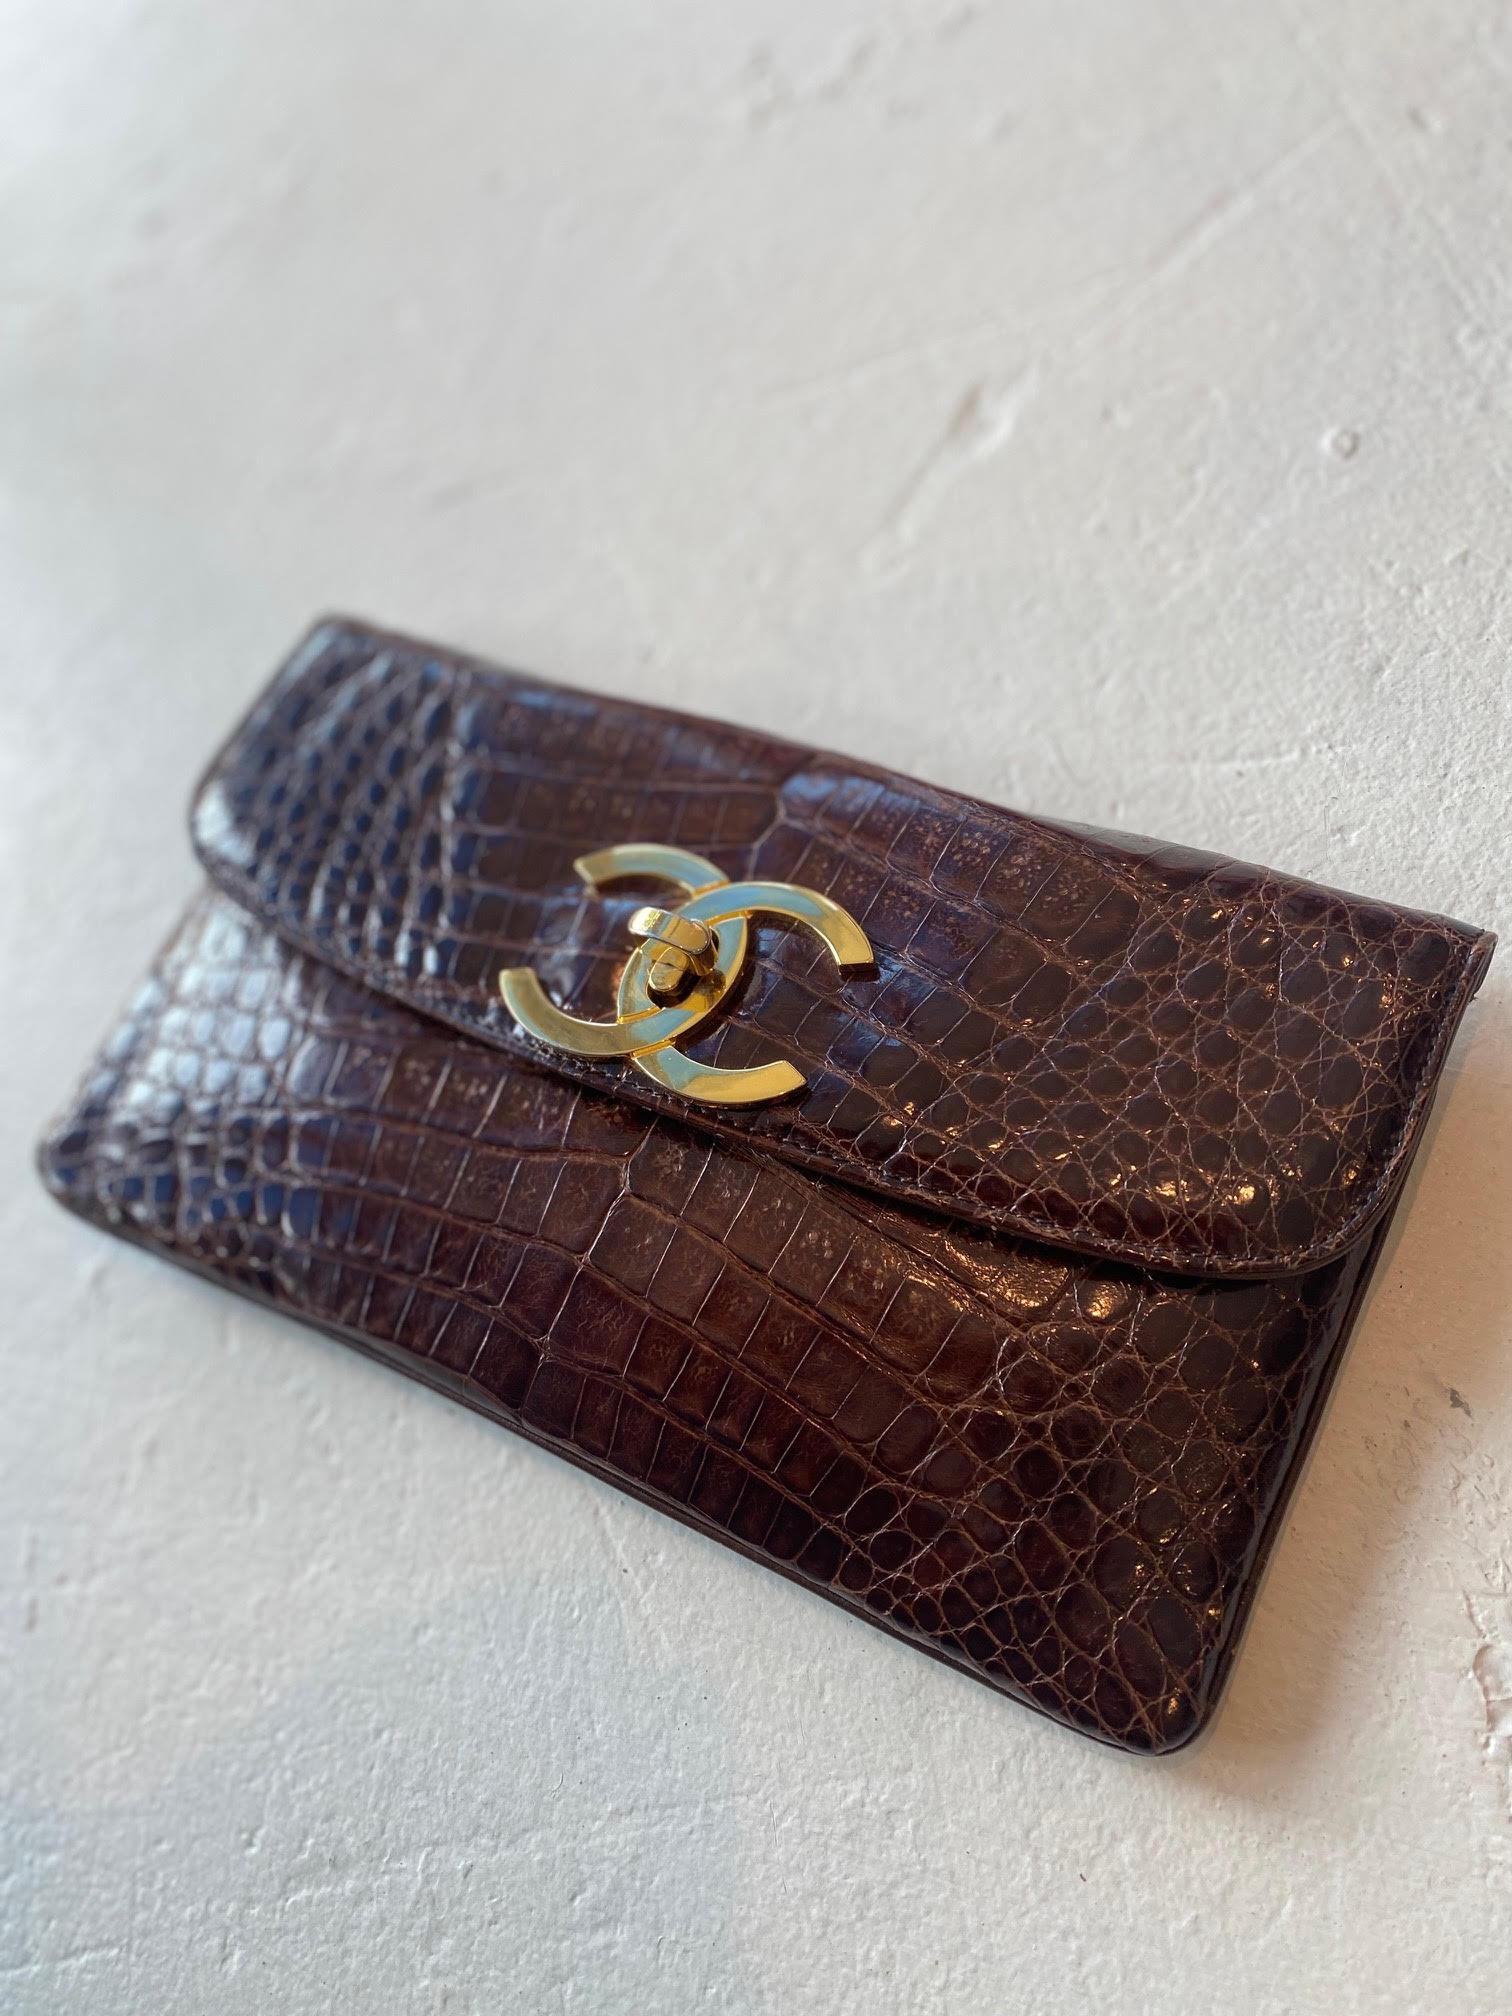 Gorgeous 24k large gold plated cc turn-lock closure 
Original tags from 1990's Barneys are still attached
Collectors Item RARE
interior brown lambskin lining that shows about 3 faint hairline scratches
some minor natural occurring fading to